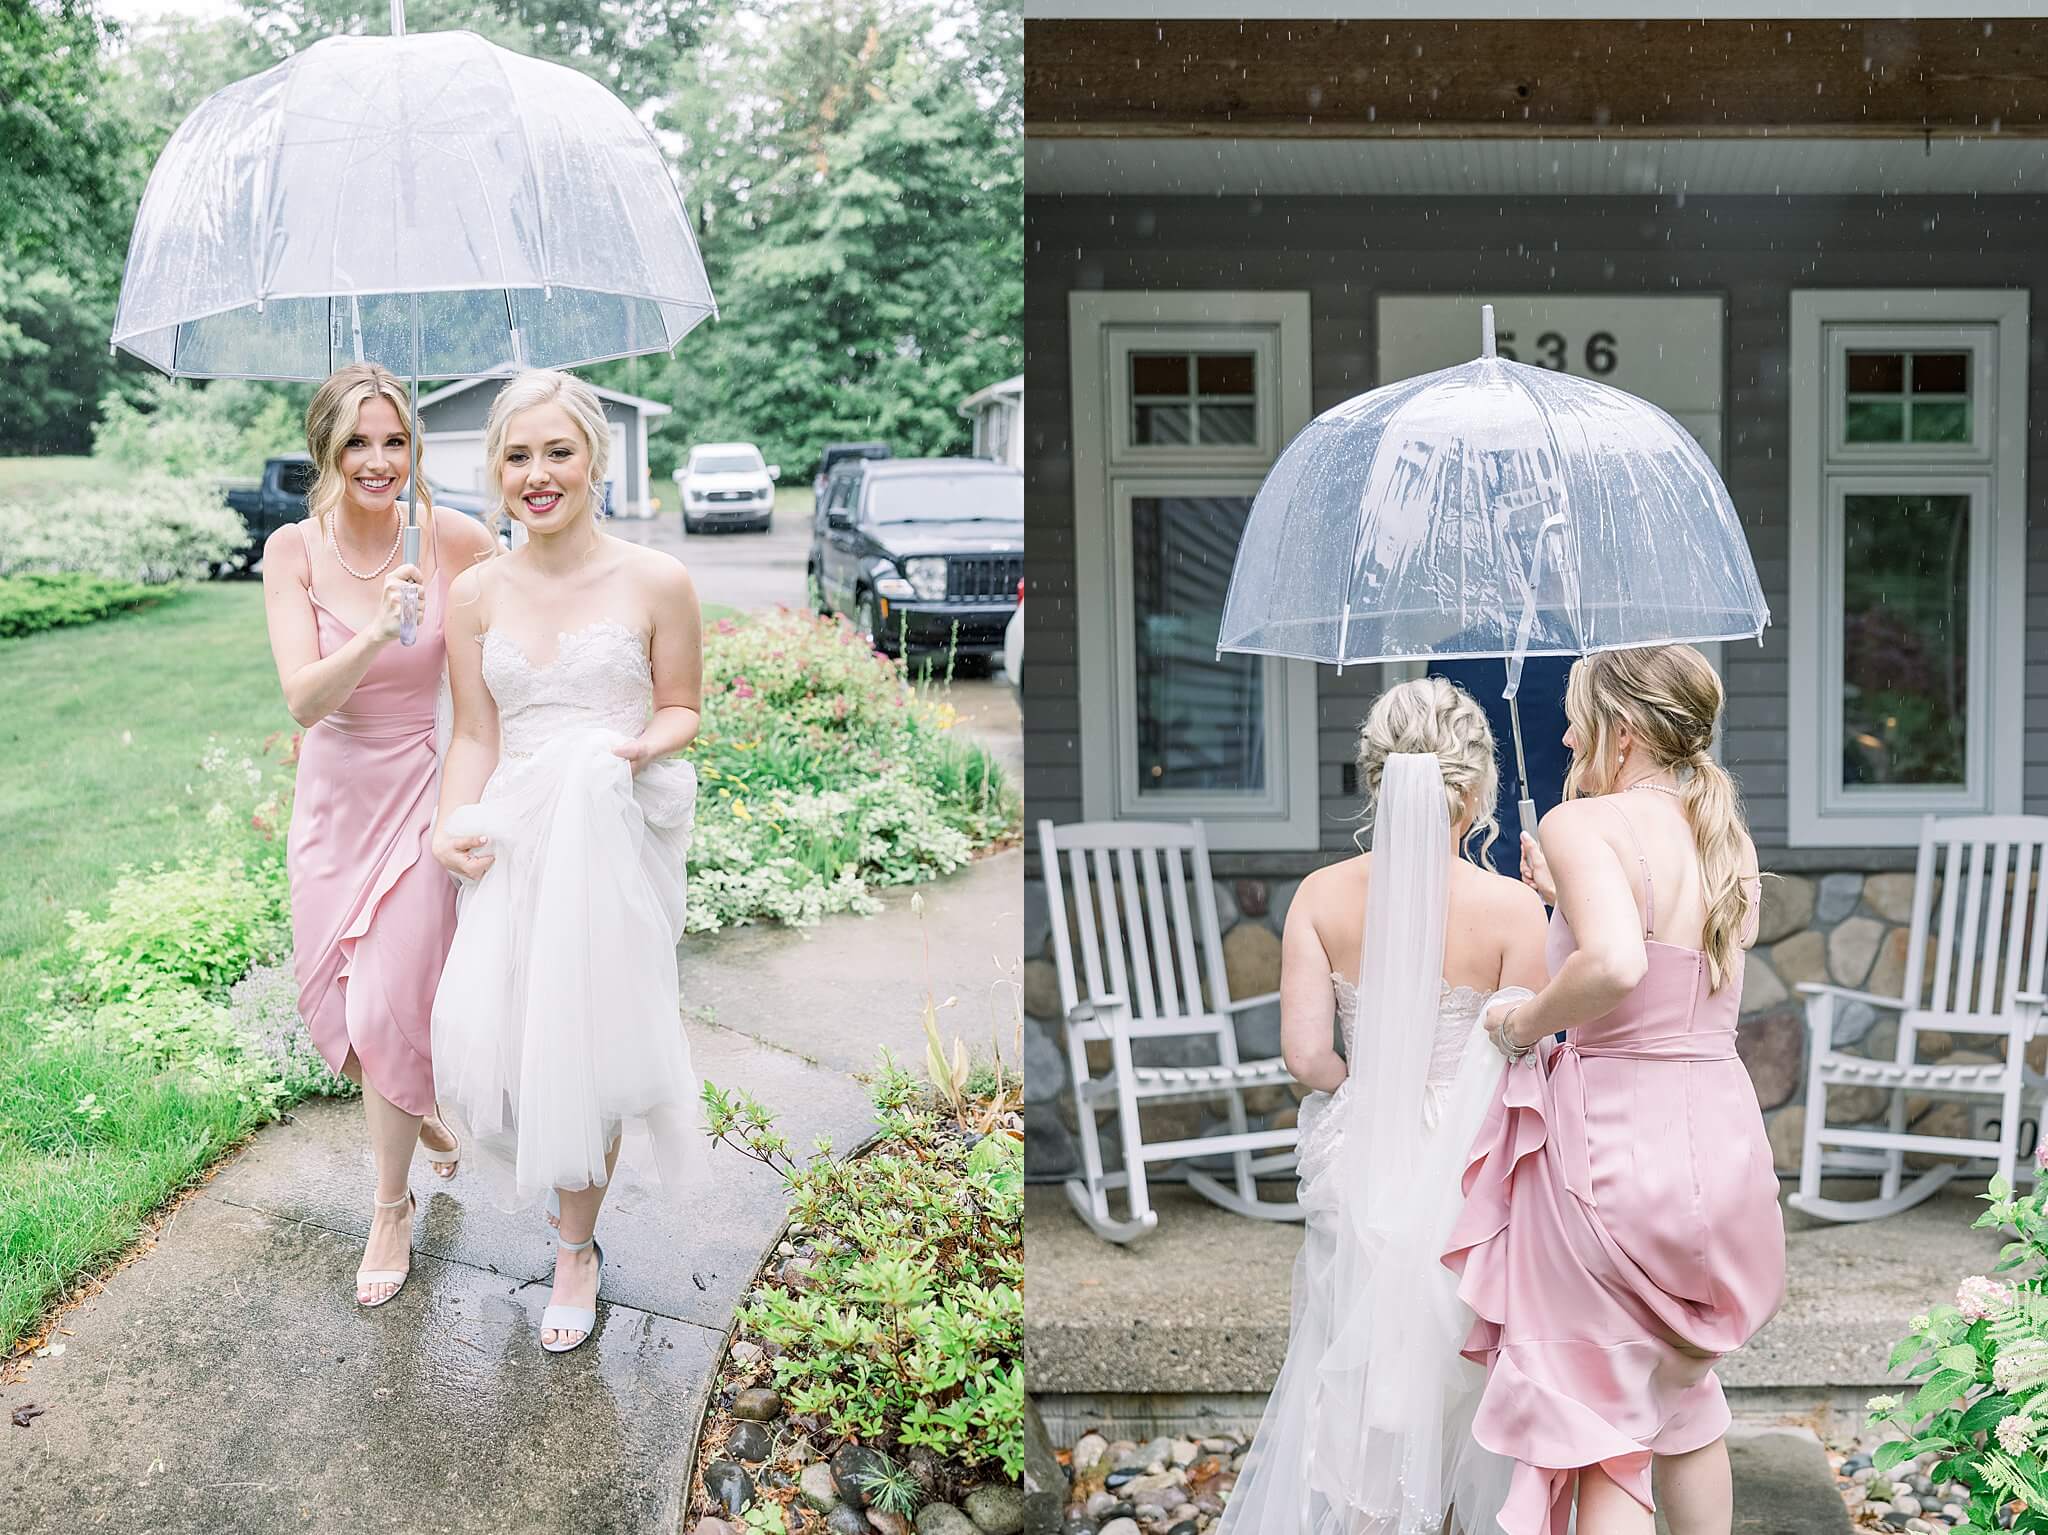 Bride walks to first look under the cover of an umbrella during her rainy Traverse City wedding day.